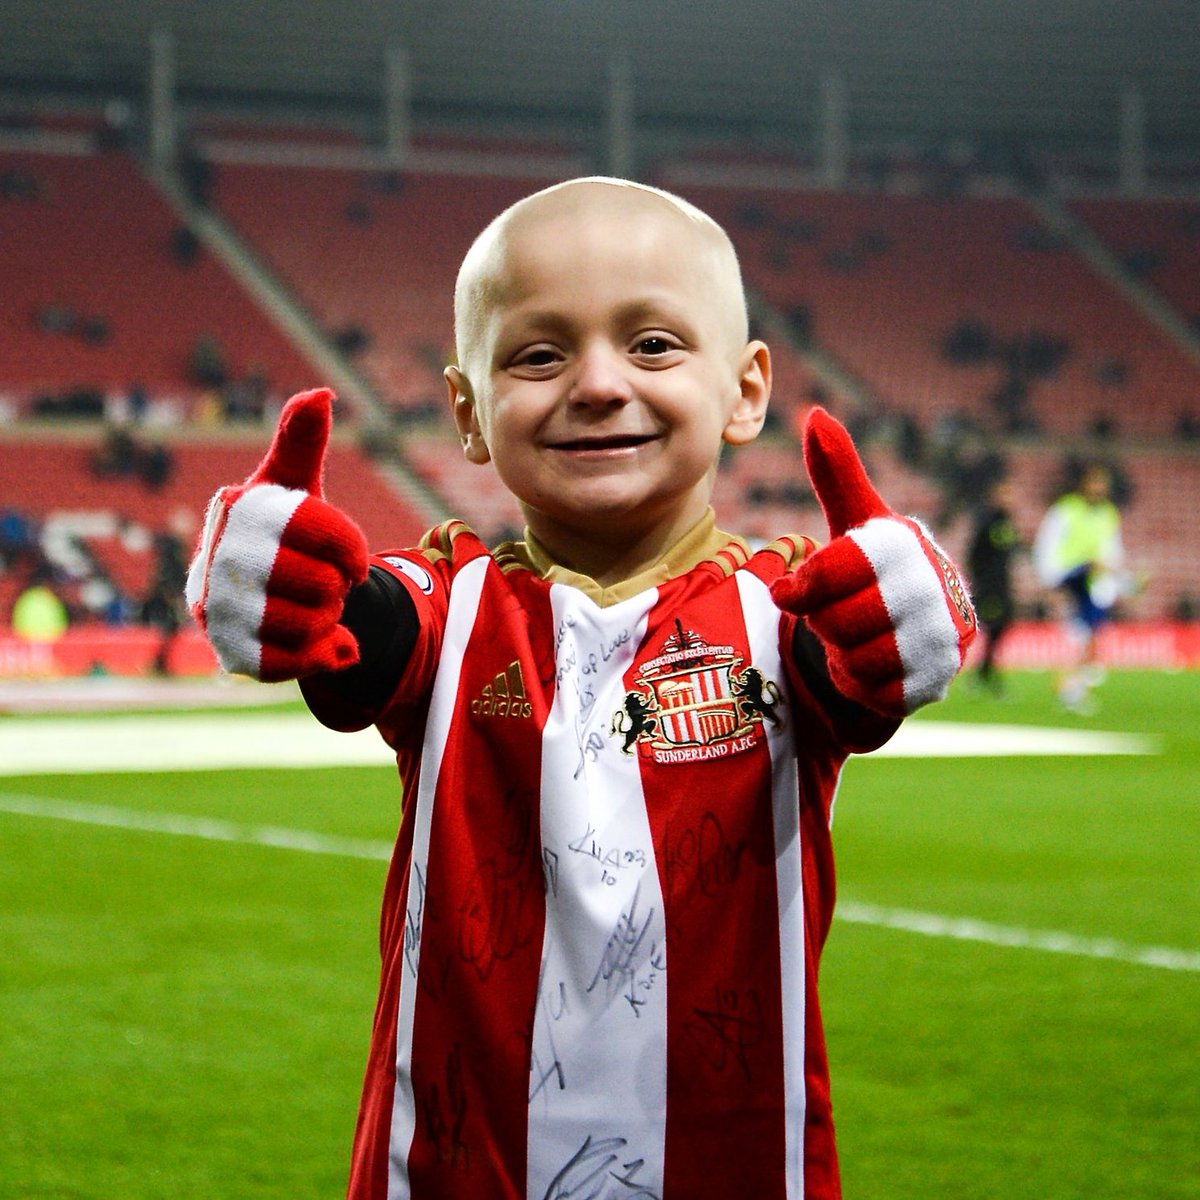 One Bradley Lowery ❤️🤍

An inspiration, forever in our hearts.